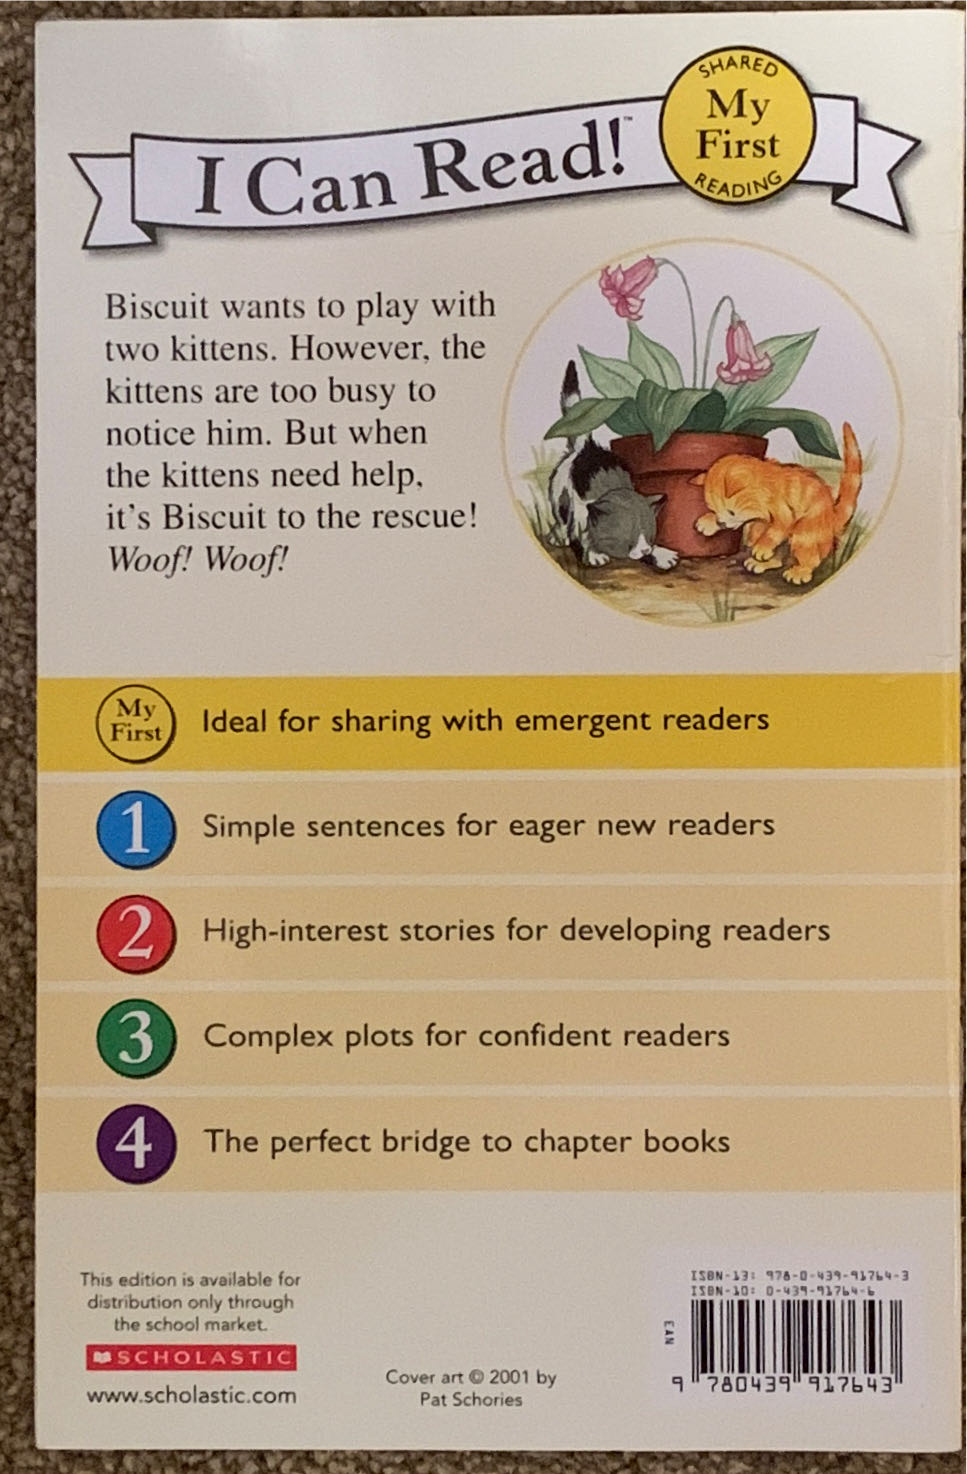 Biscuit Wants To Play - Alyssa Satin Capuculli (A Scholastic Press - Paperback) book collectible [Barcode 9780439917643] - Main Image 2